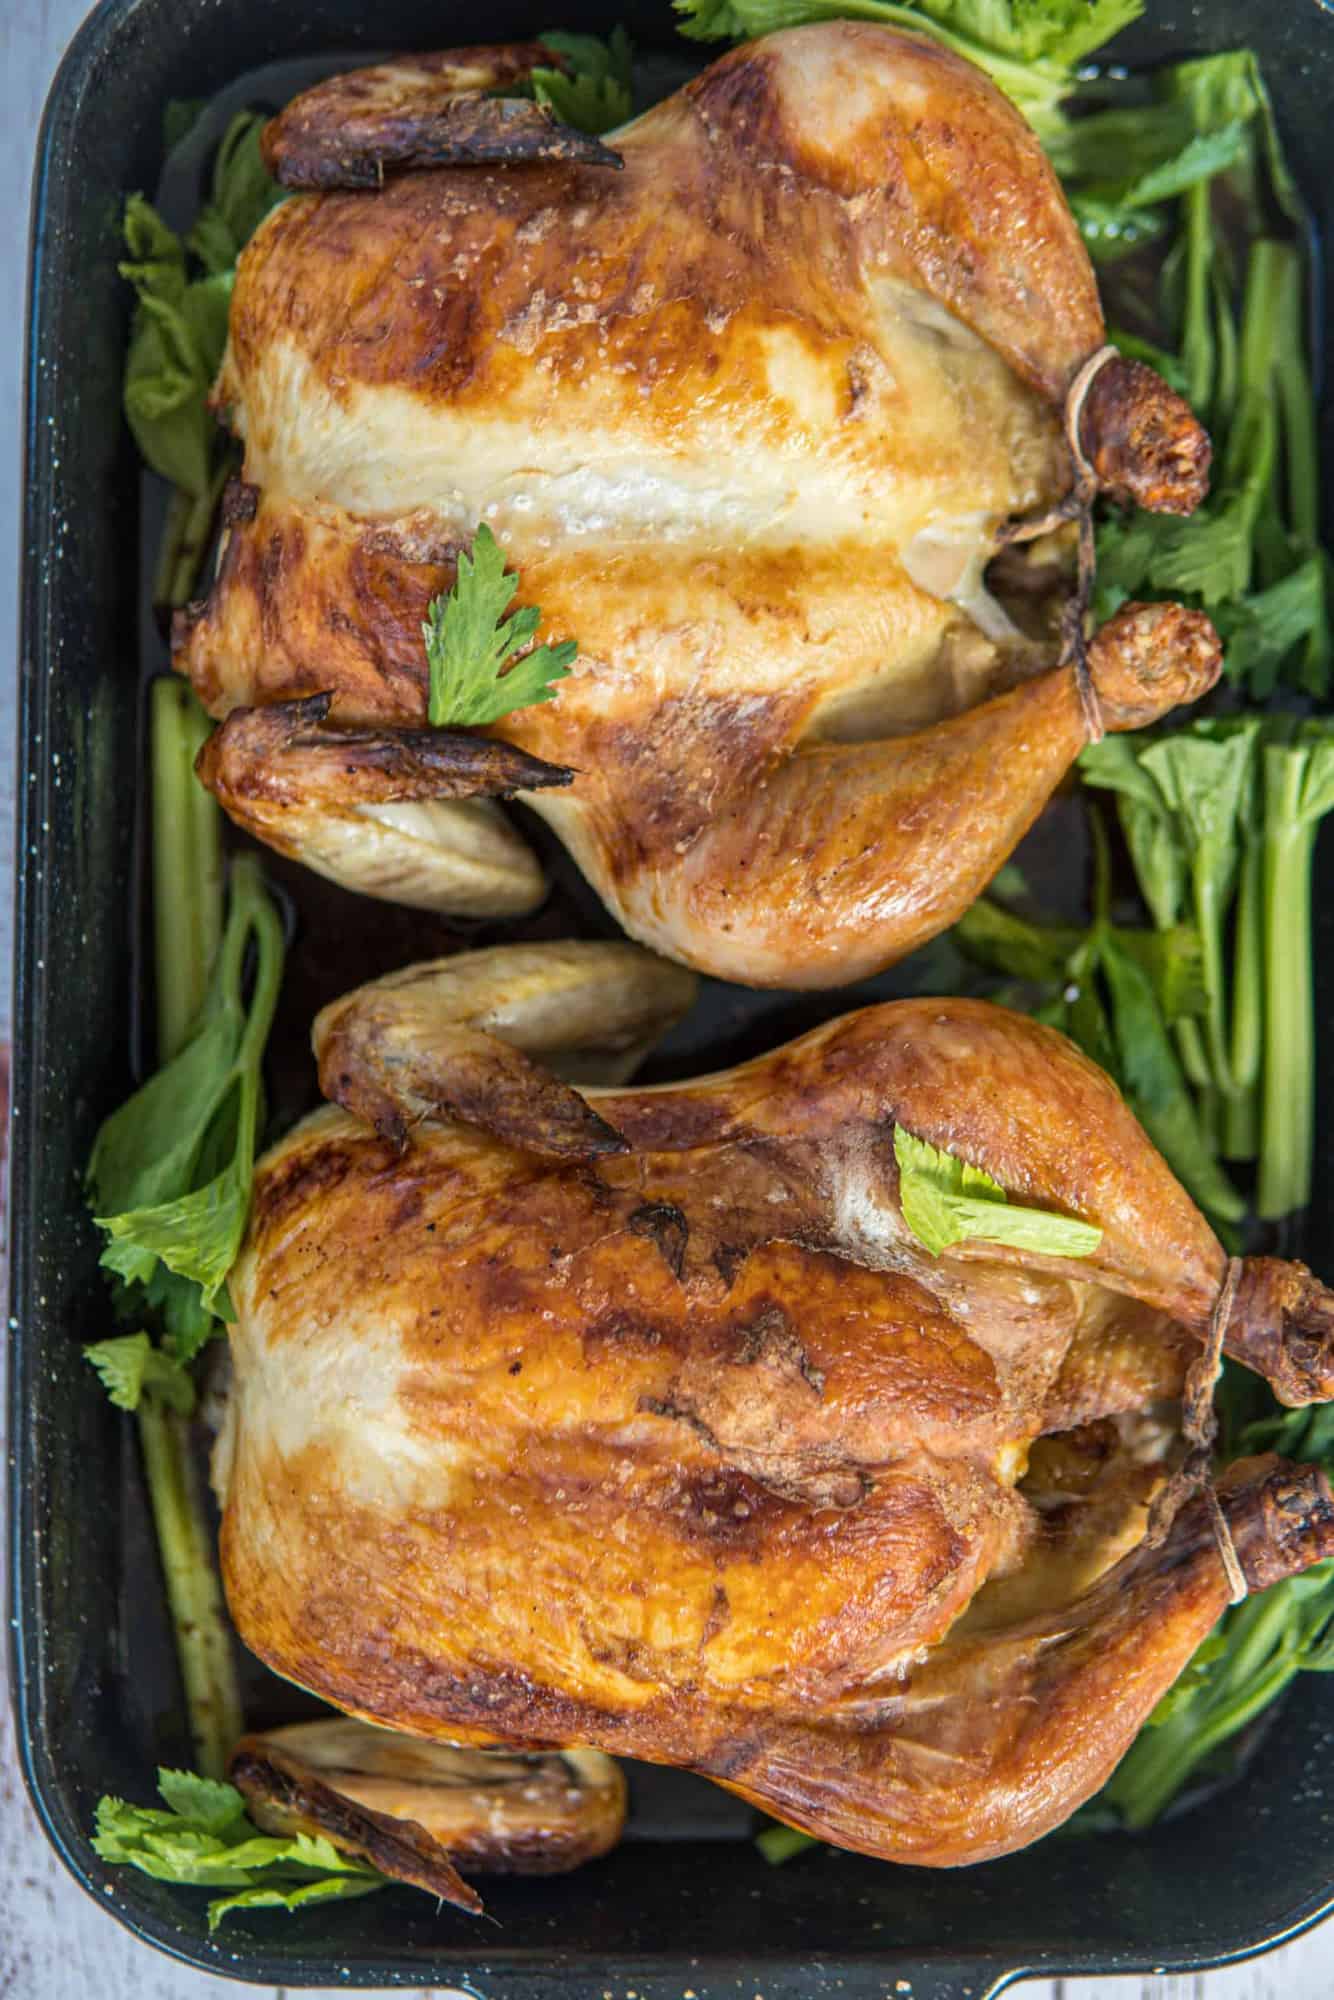 This Buttermilk Roasted Chicken uses only three ingredients which are a whole chicken, salt and buttermilk and is roasted into perfection!